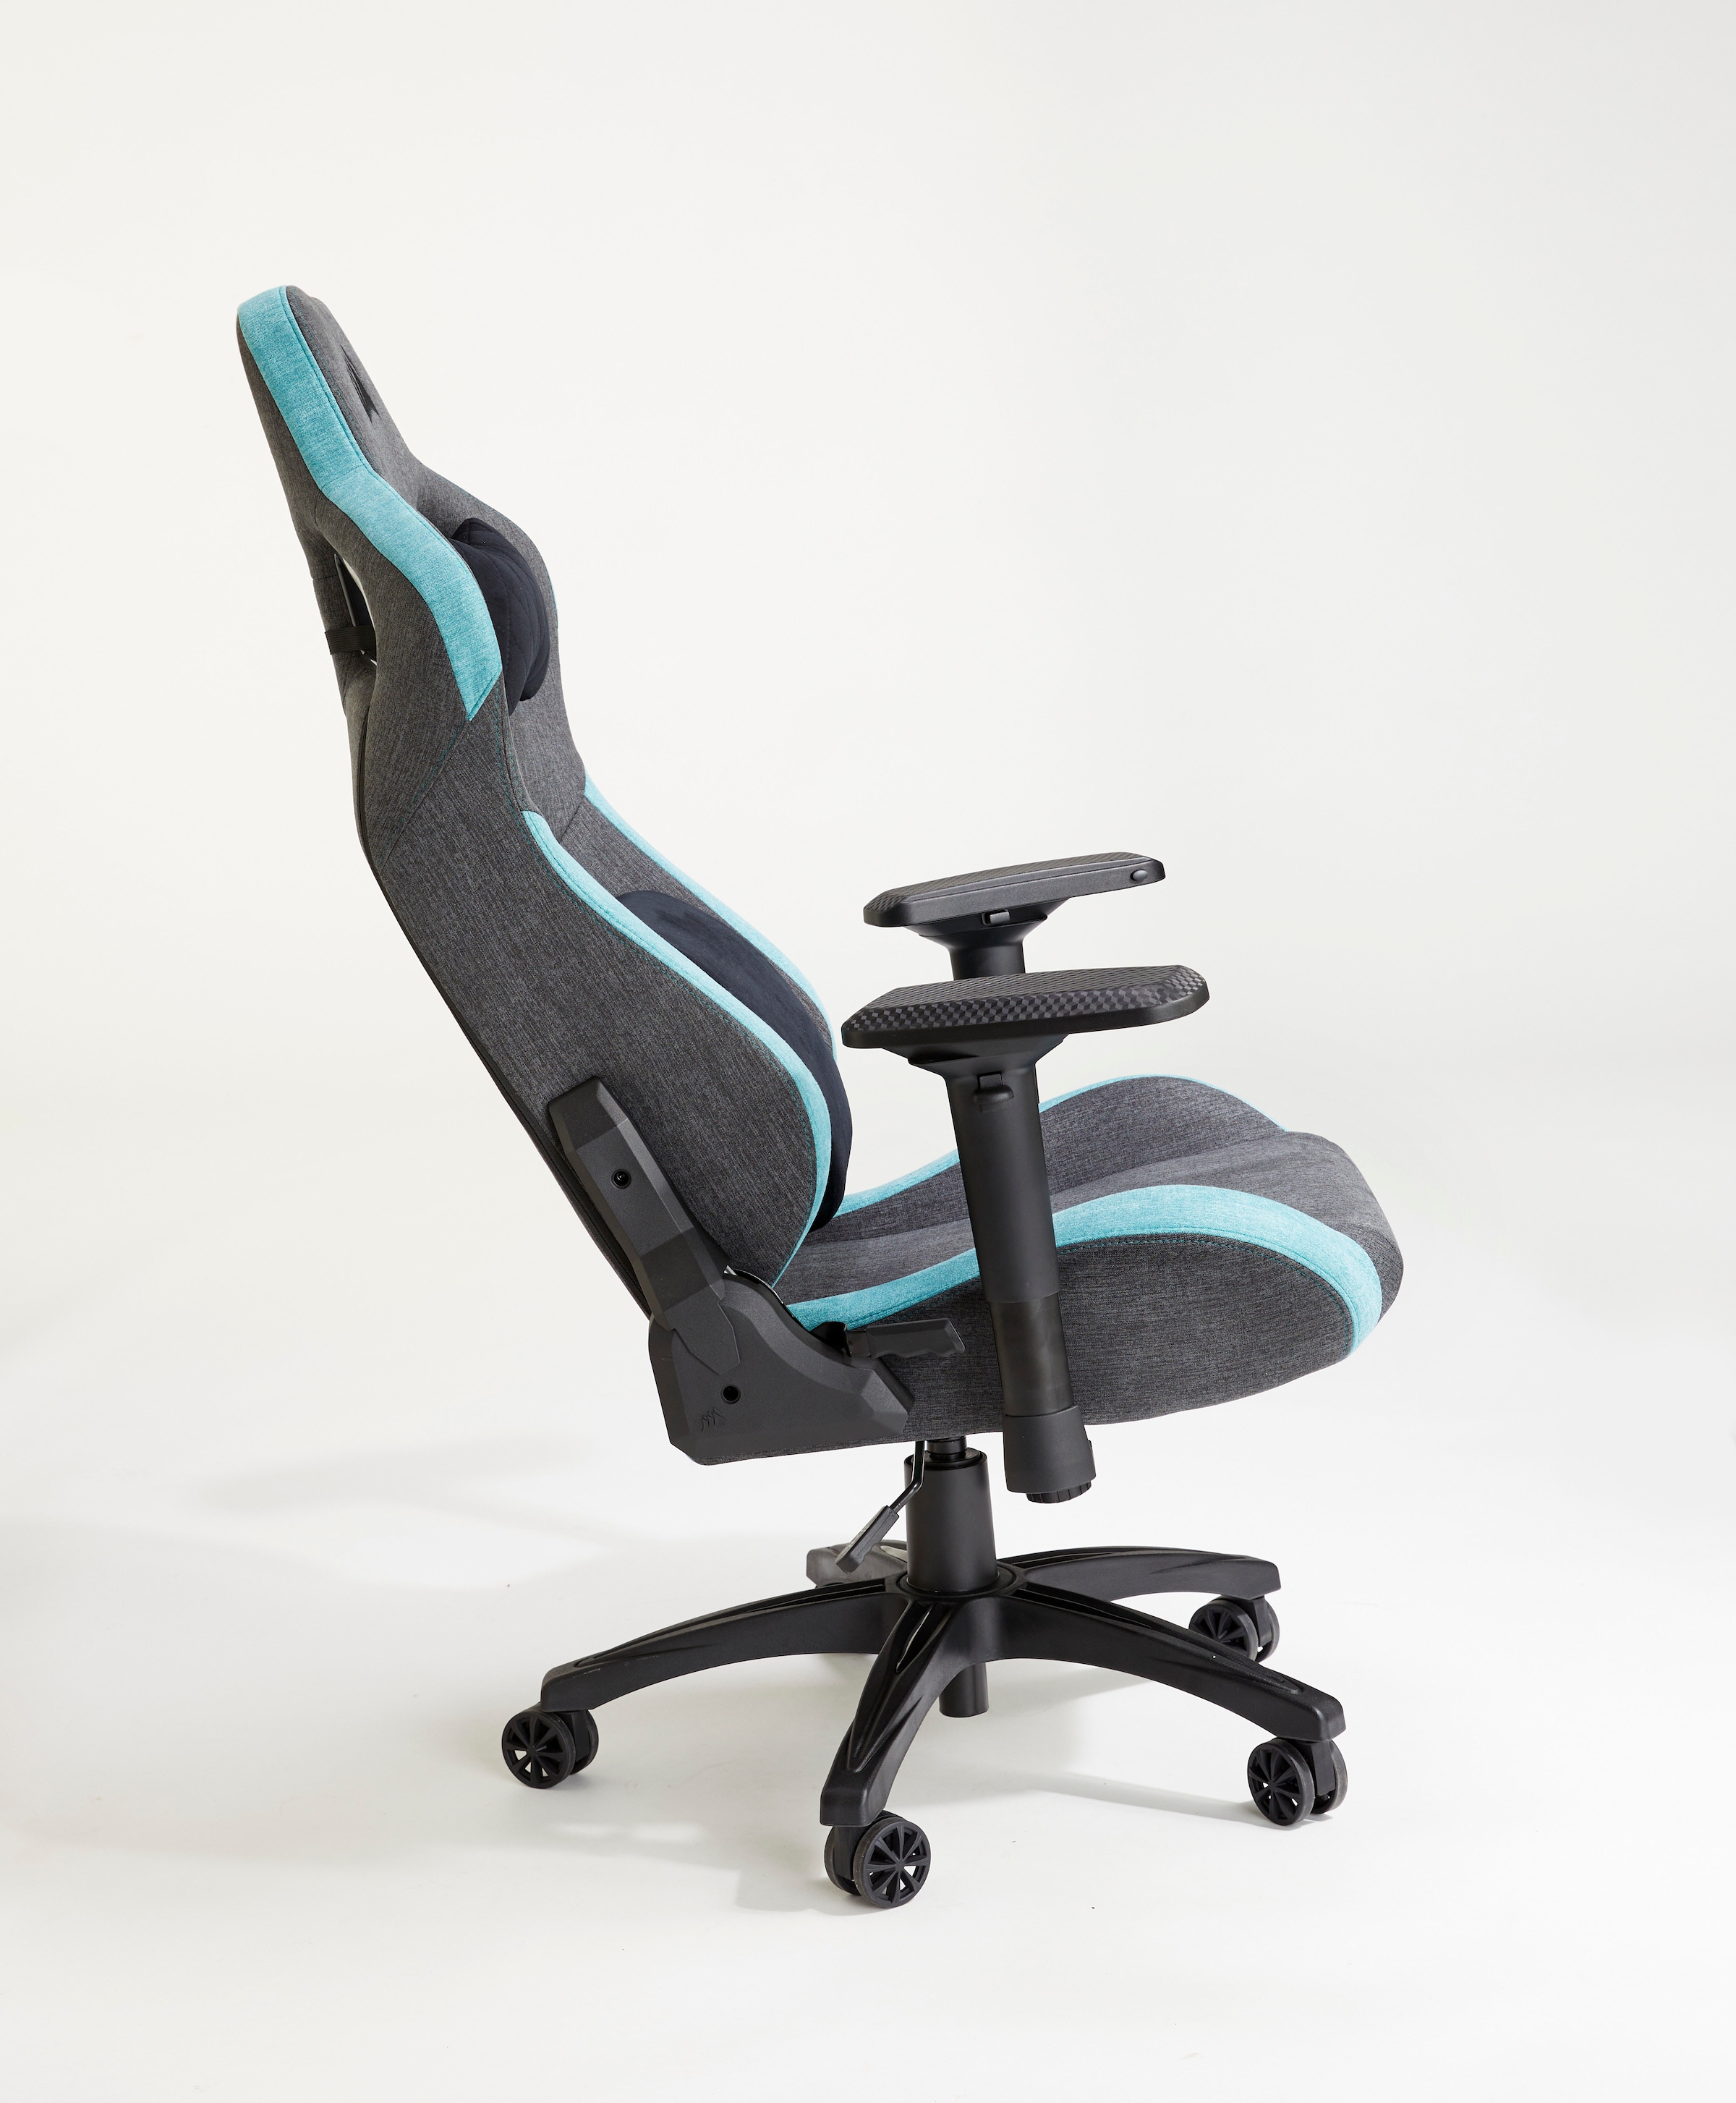 Design, Corsair Exterior Fabric »T3 Racing-Inspired UNIVERSAL Chair Soft Gaming bei Rush Chair«, Gaming Fabric online